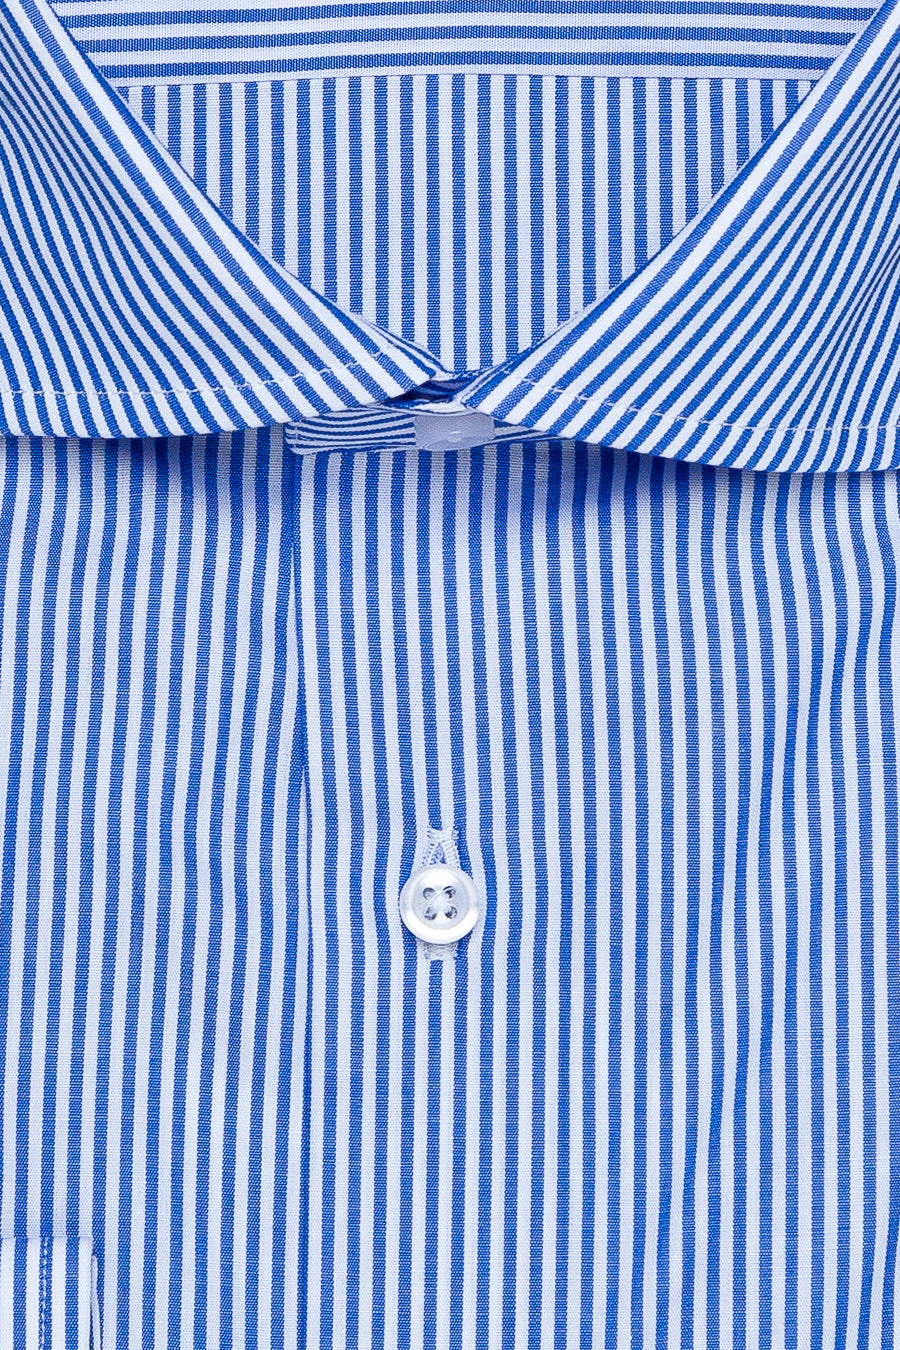 <tc>Made in Italy Cotton Shirt</tc>